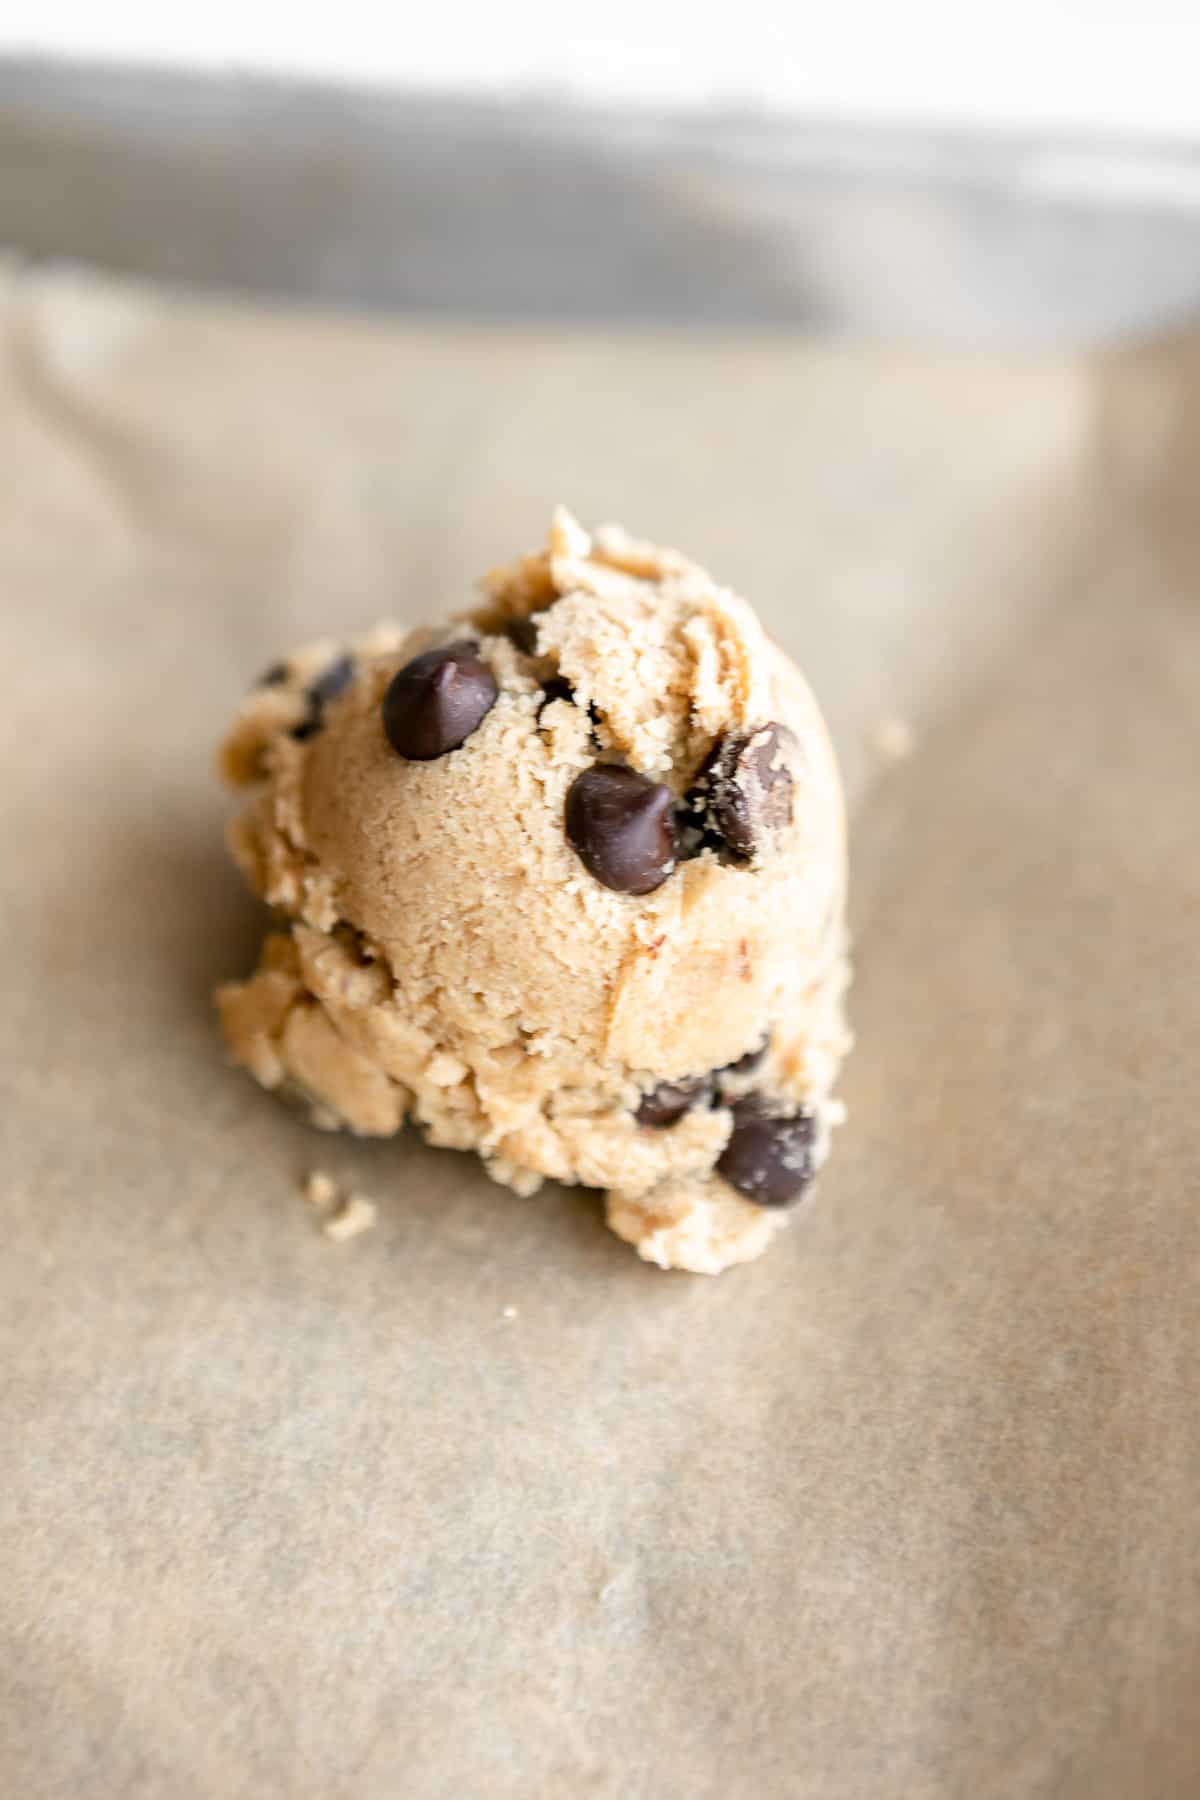 cookie dough scooped into a ball